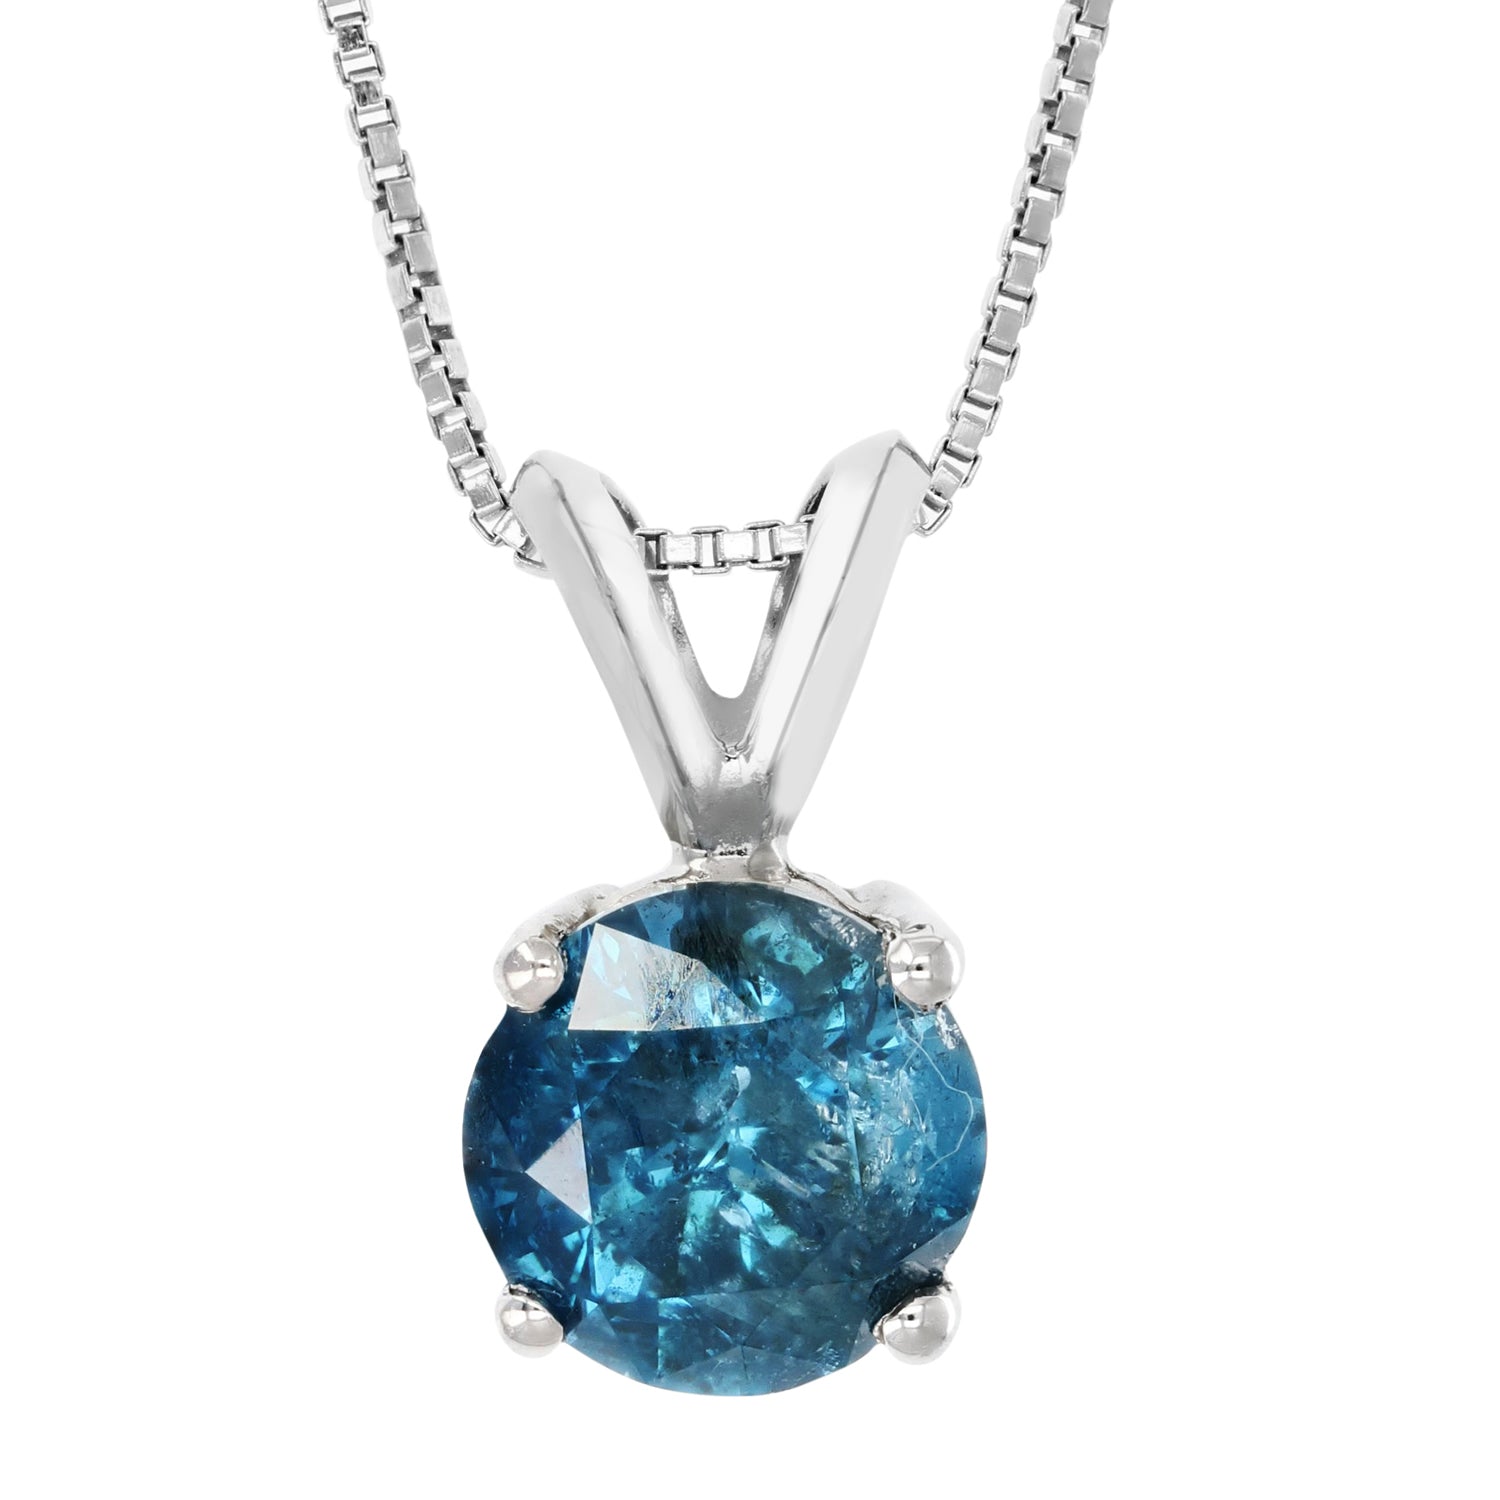 1.65 cttw Diamond Pendant, Blue Diamond Solitaire Pendant Necklace for Women in 14K White Gold with 18 Inch Chain, Prong Setting